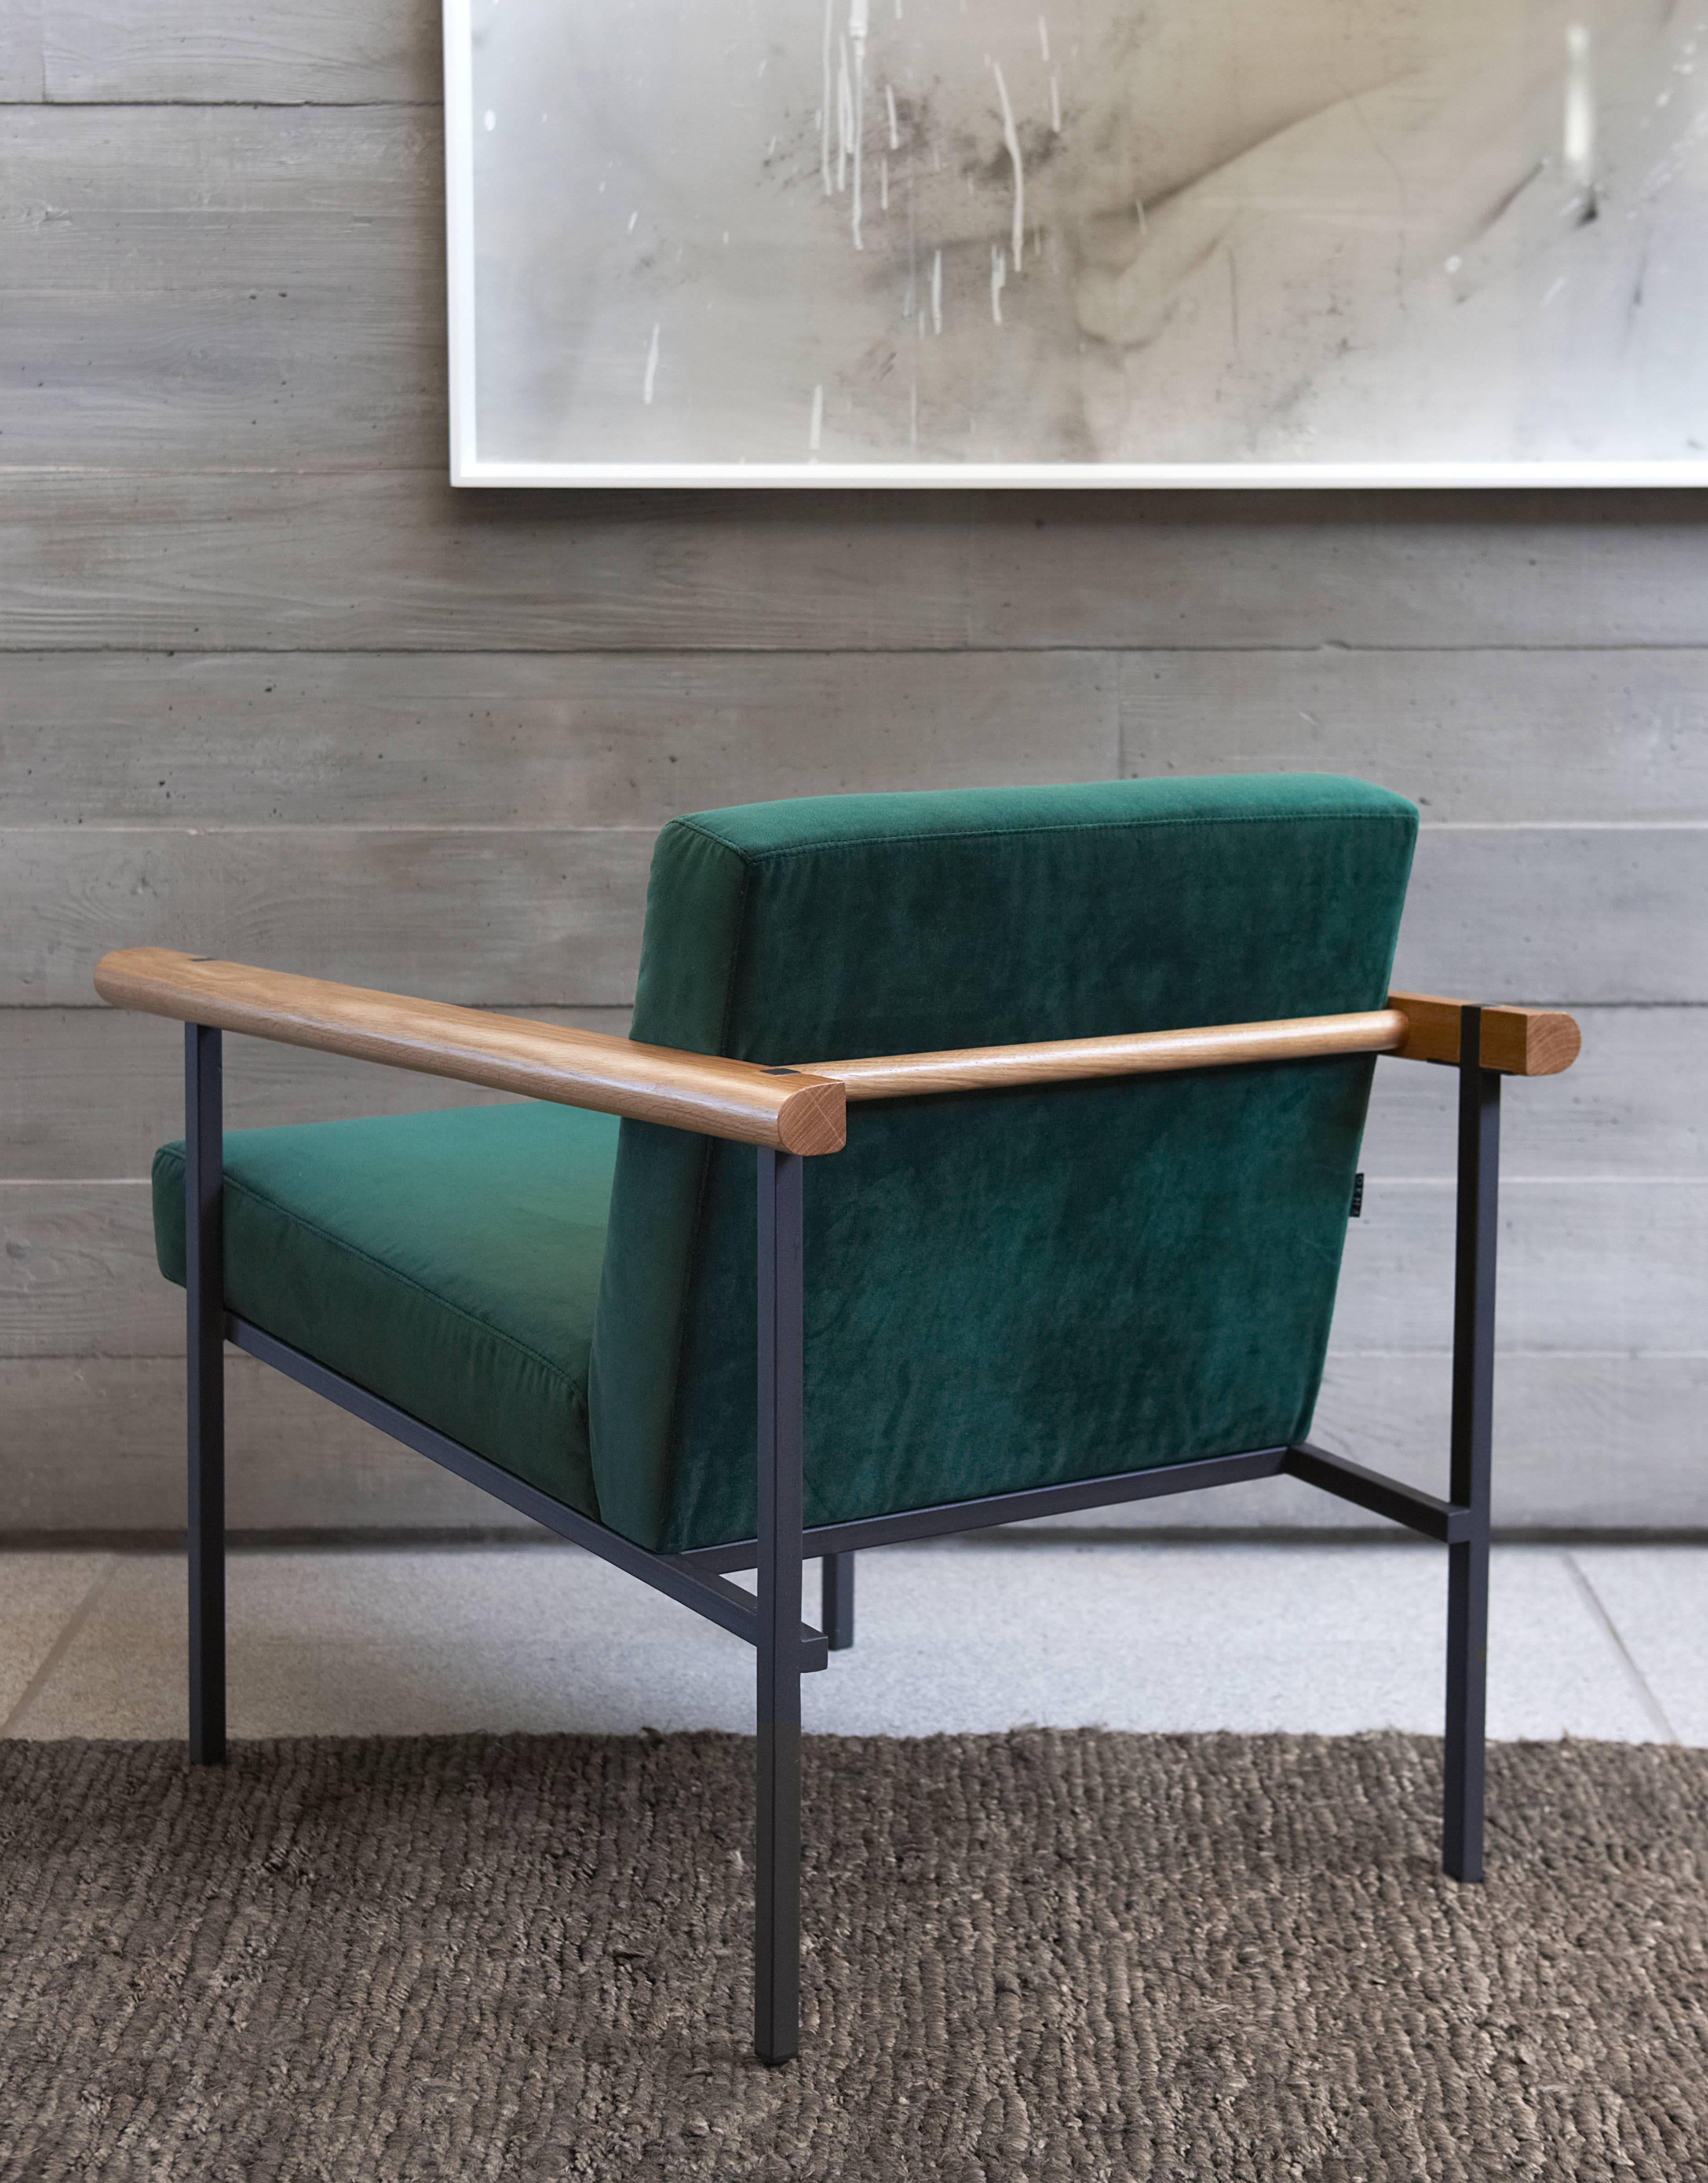 A rectilinear metal structure supports a leather upholstered, floating seat. The solid timber arms are crafted from a selection of quality woods. The character of the Ray armchair is one of taught clarity and essential lines. The combination of